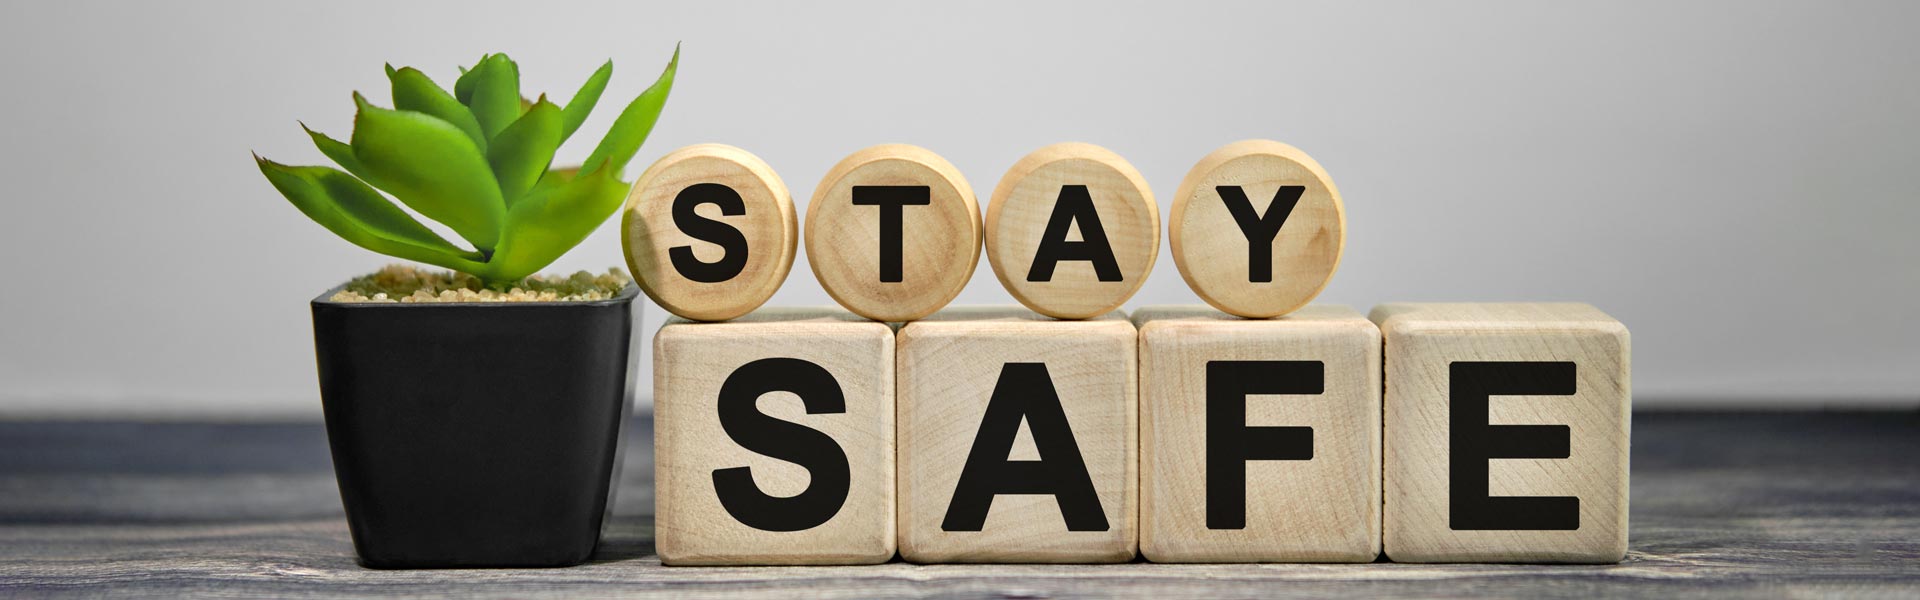 Plant with wooden blocks spelling "Stay Safe"